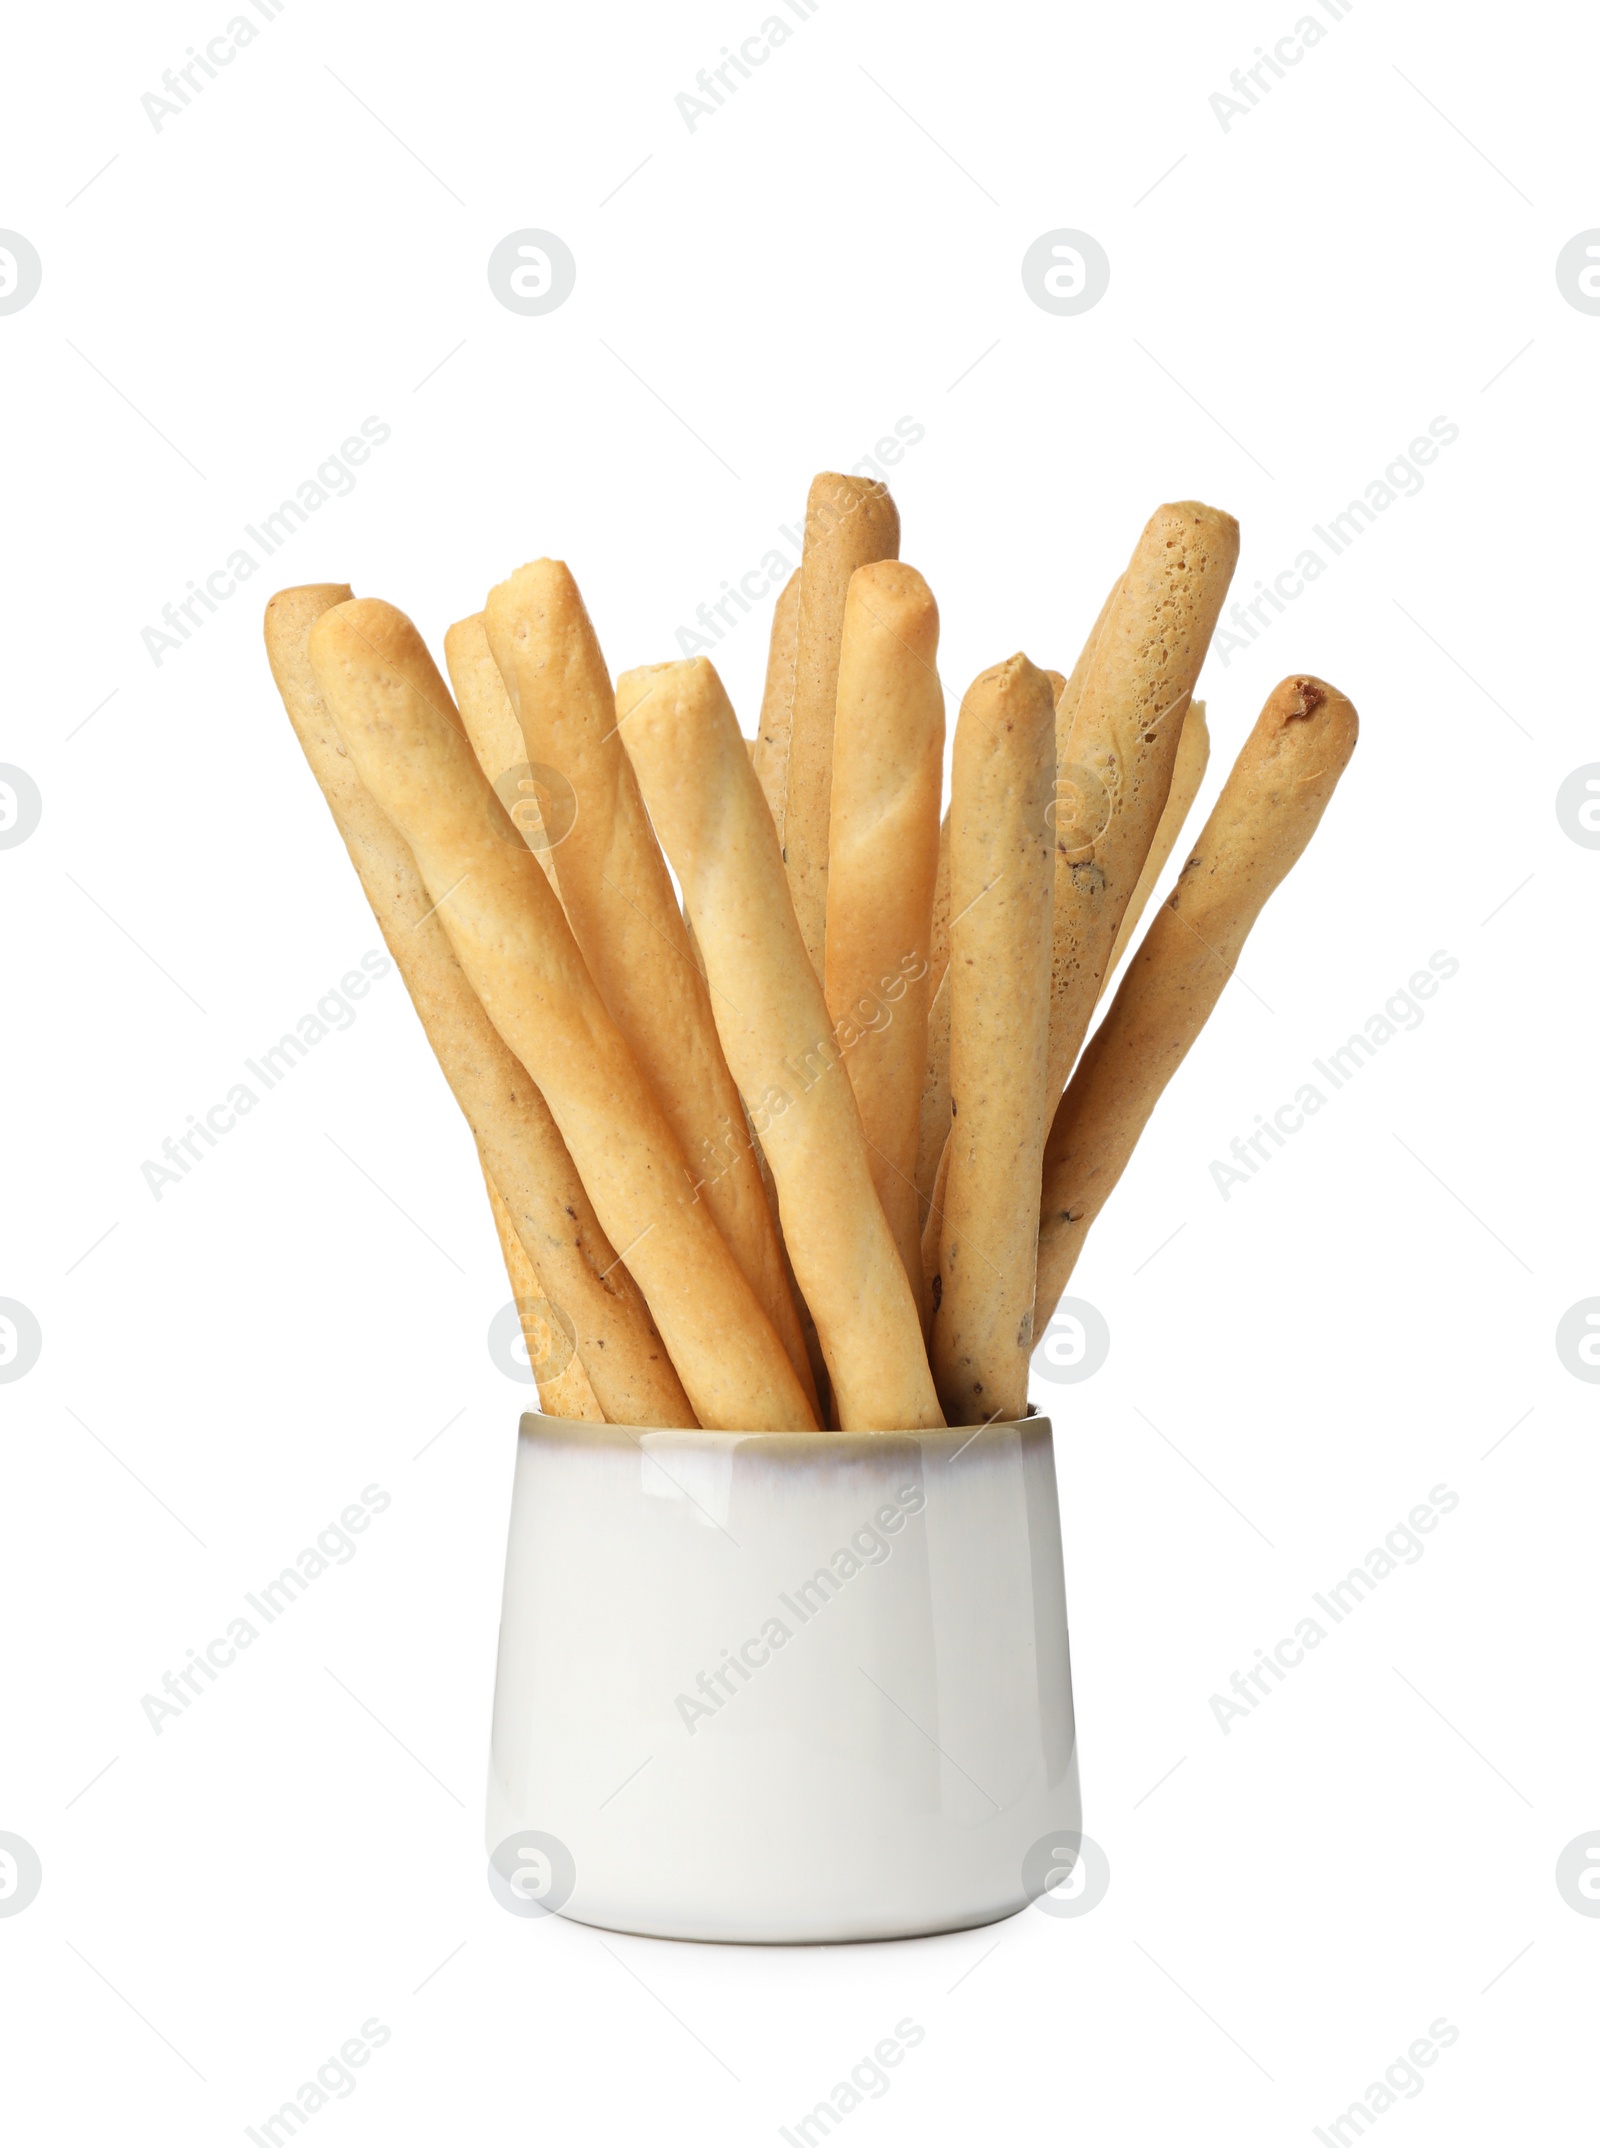 Photo of Delicious grissini sticks in cup on white background